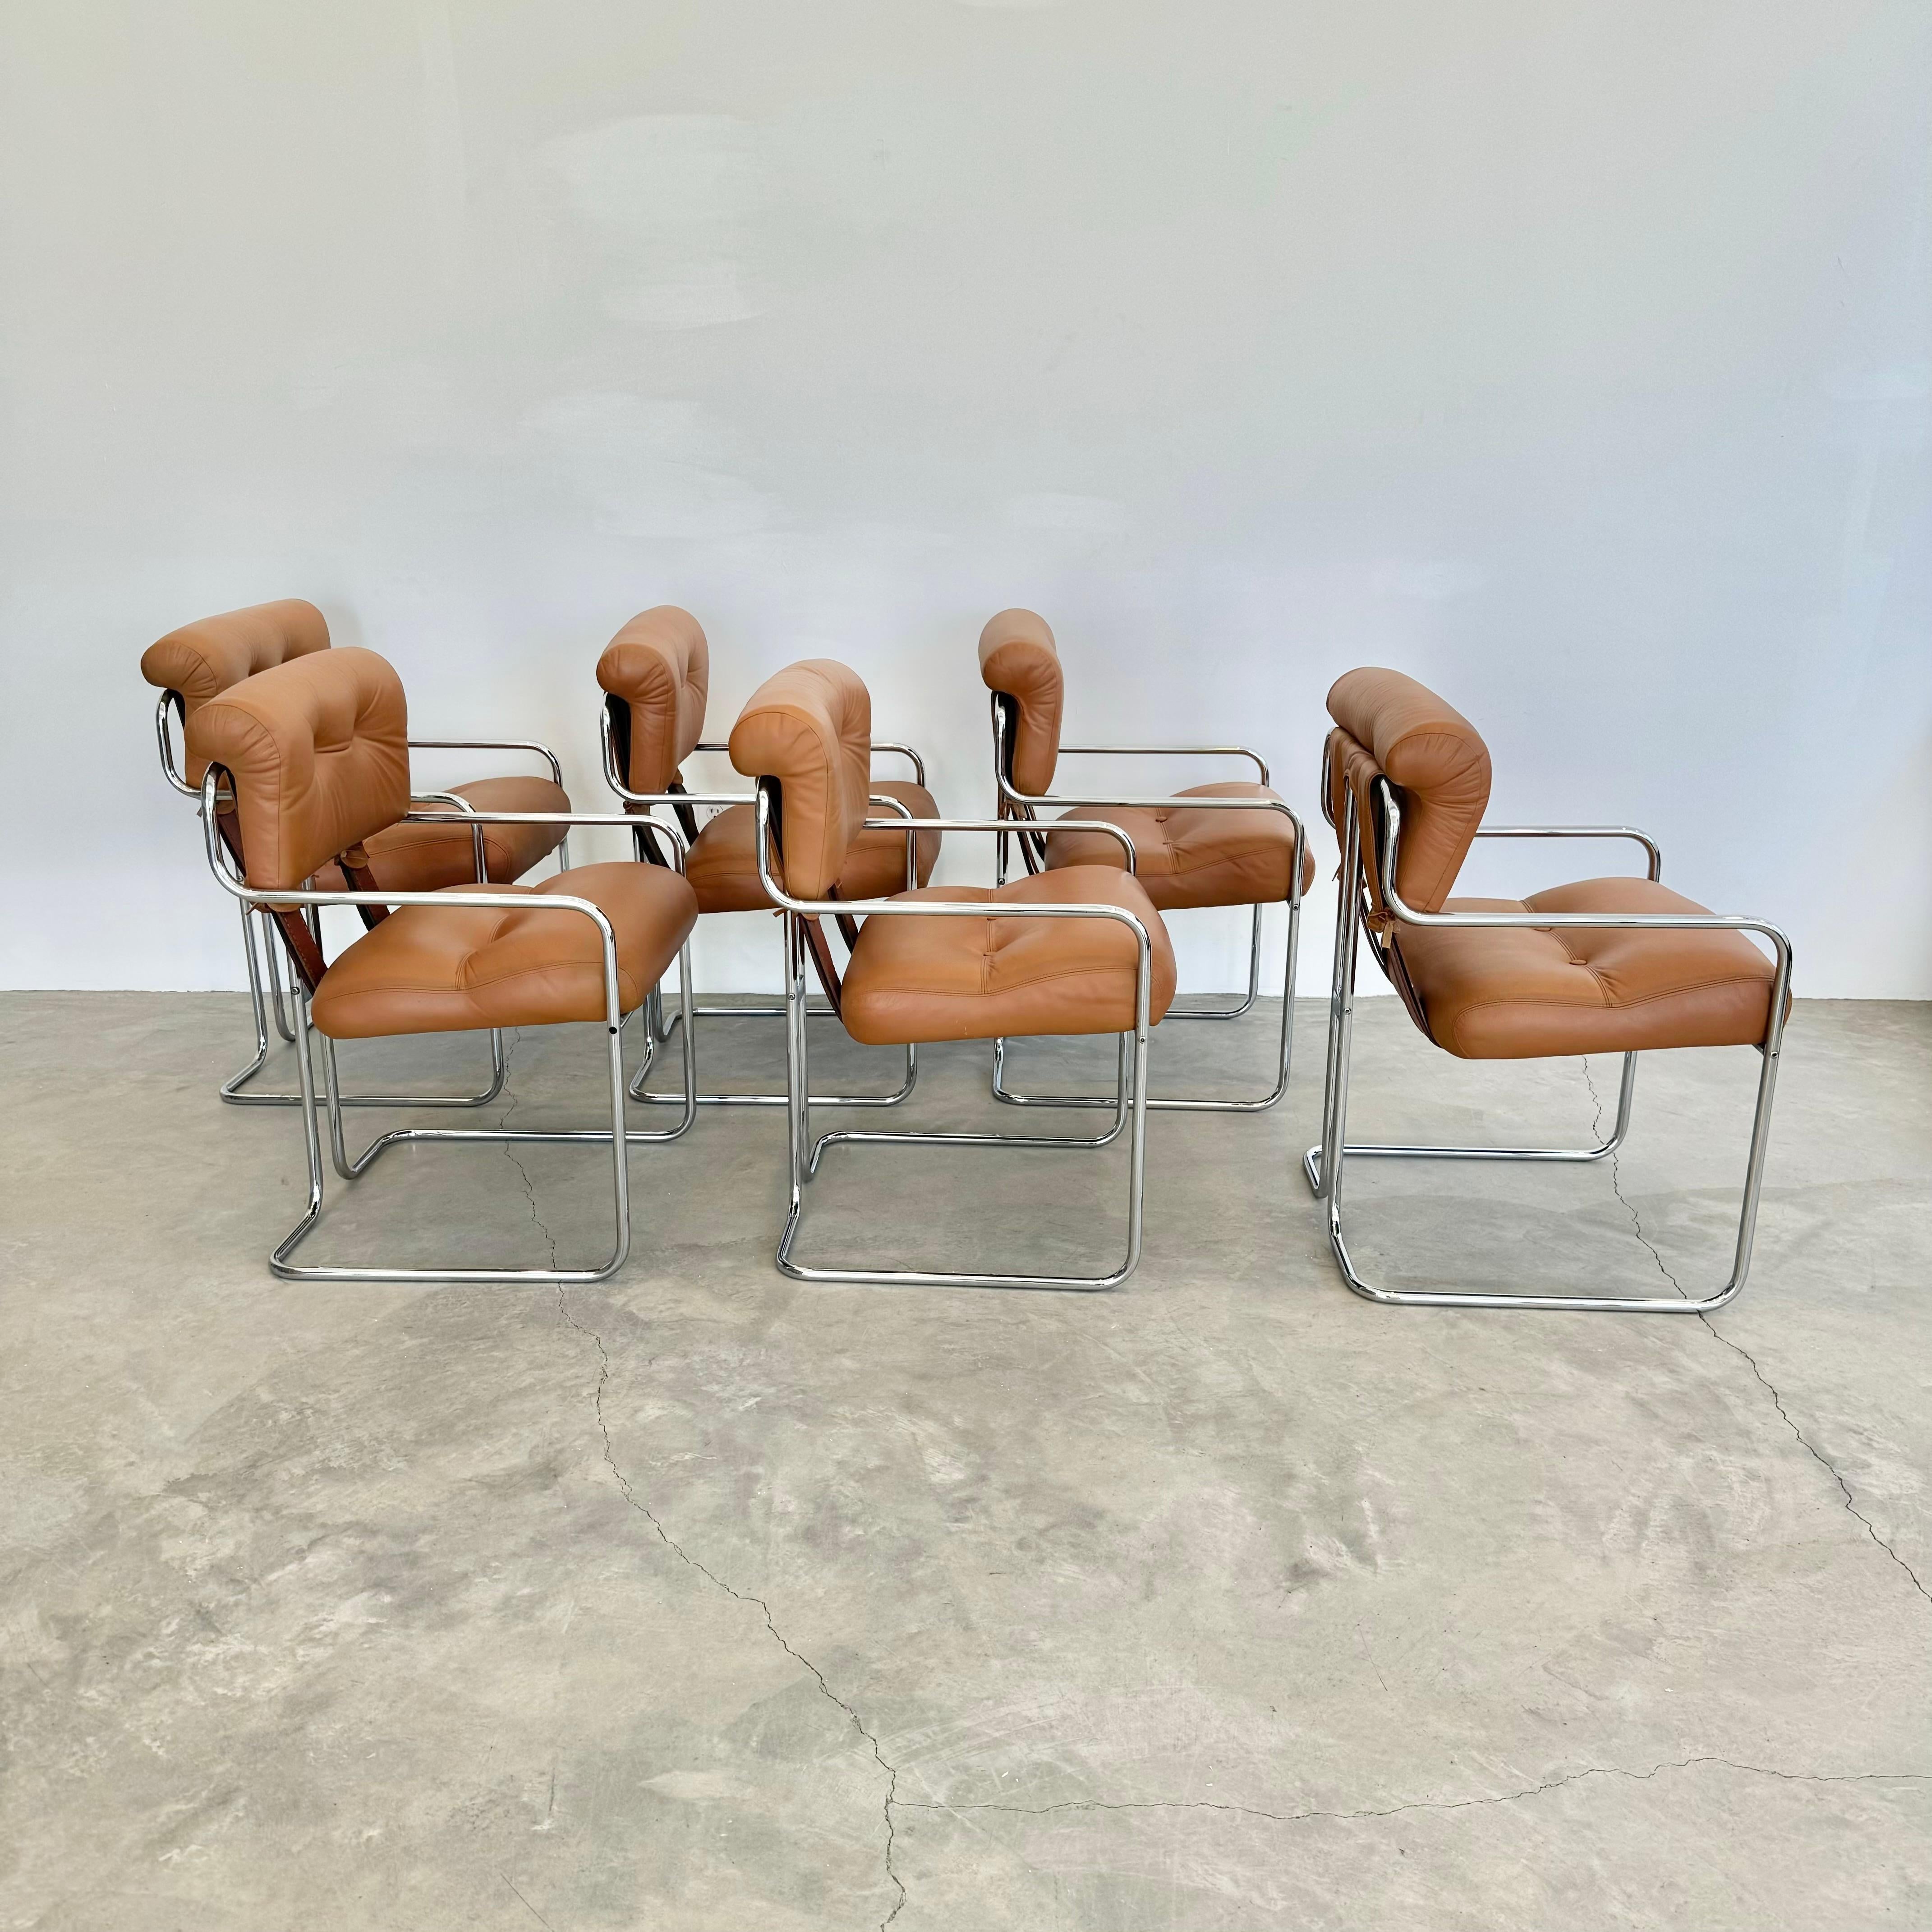 Set of 6 'Tucroma' Chairs in Tan by Guido Faleschini, 1970s Italy For Sale 5